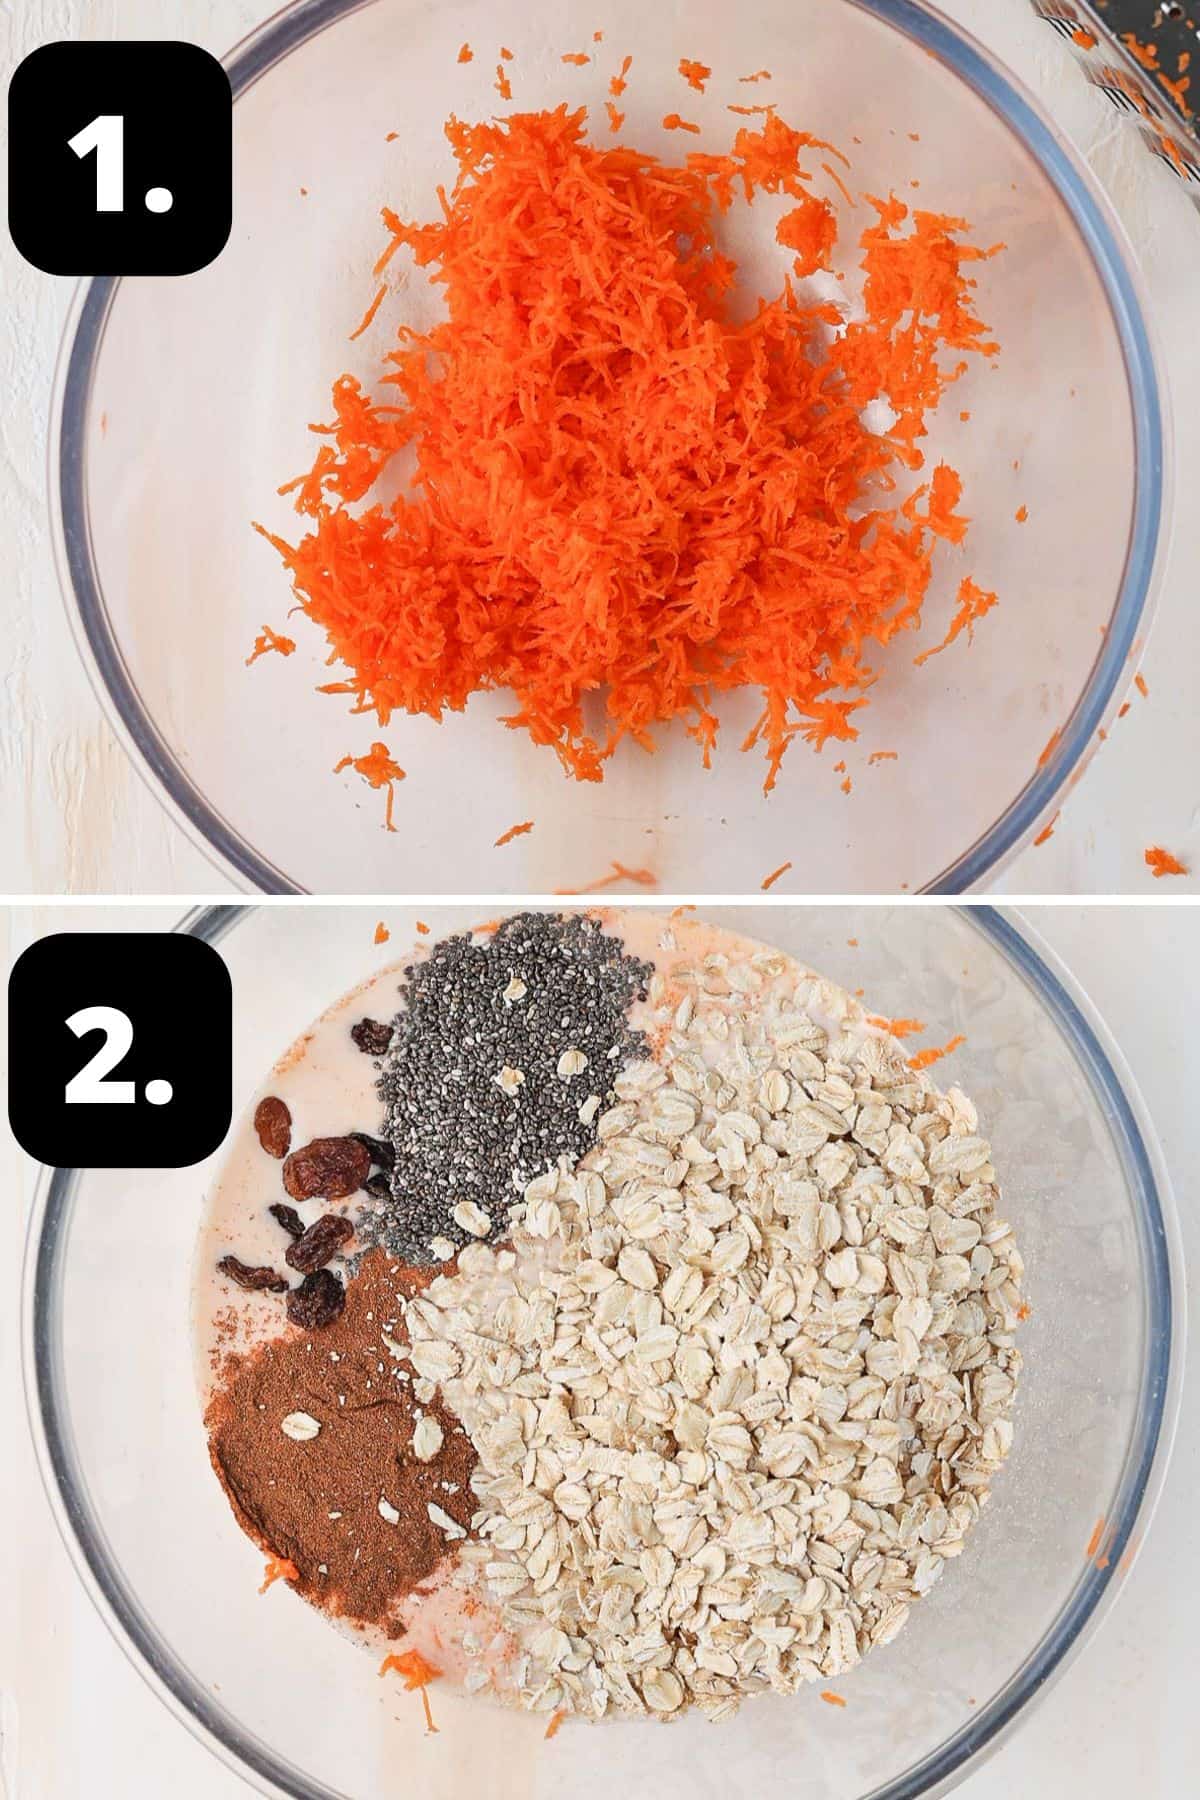 Steps 1-2 of preparing this recipe - the grated carrot in a bowl and adding the other ingredients to the carrot.